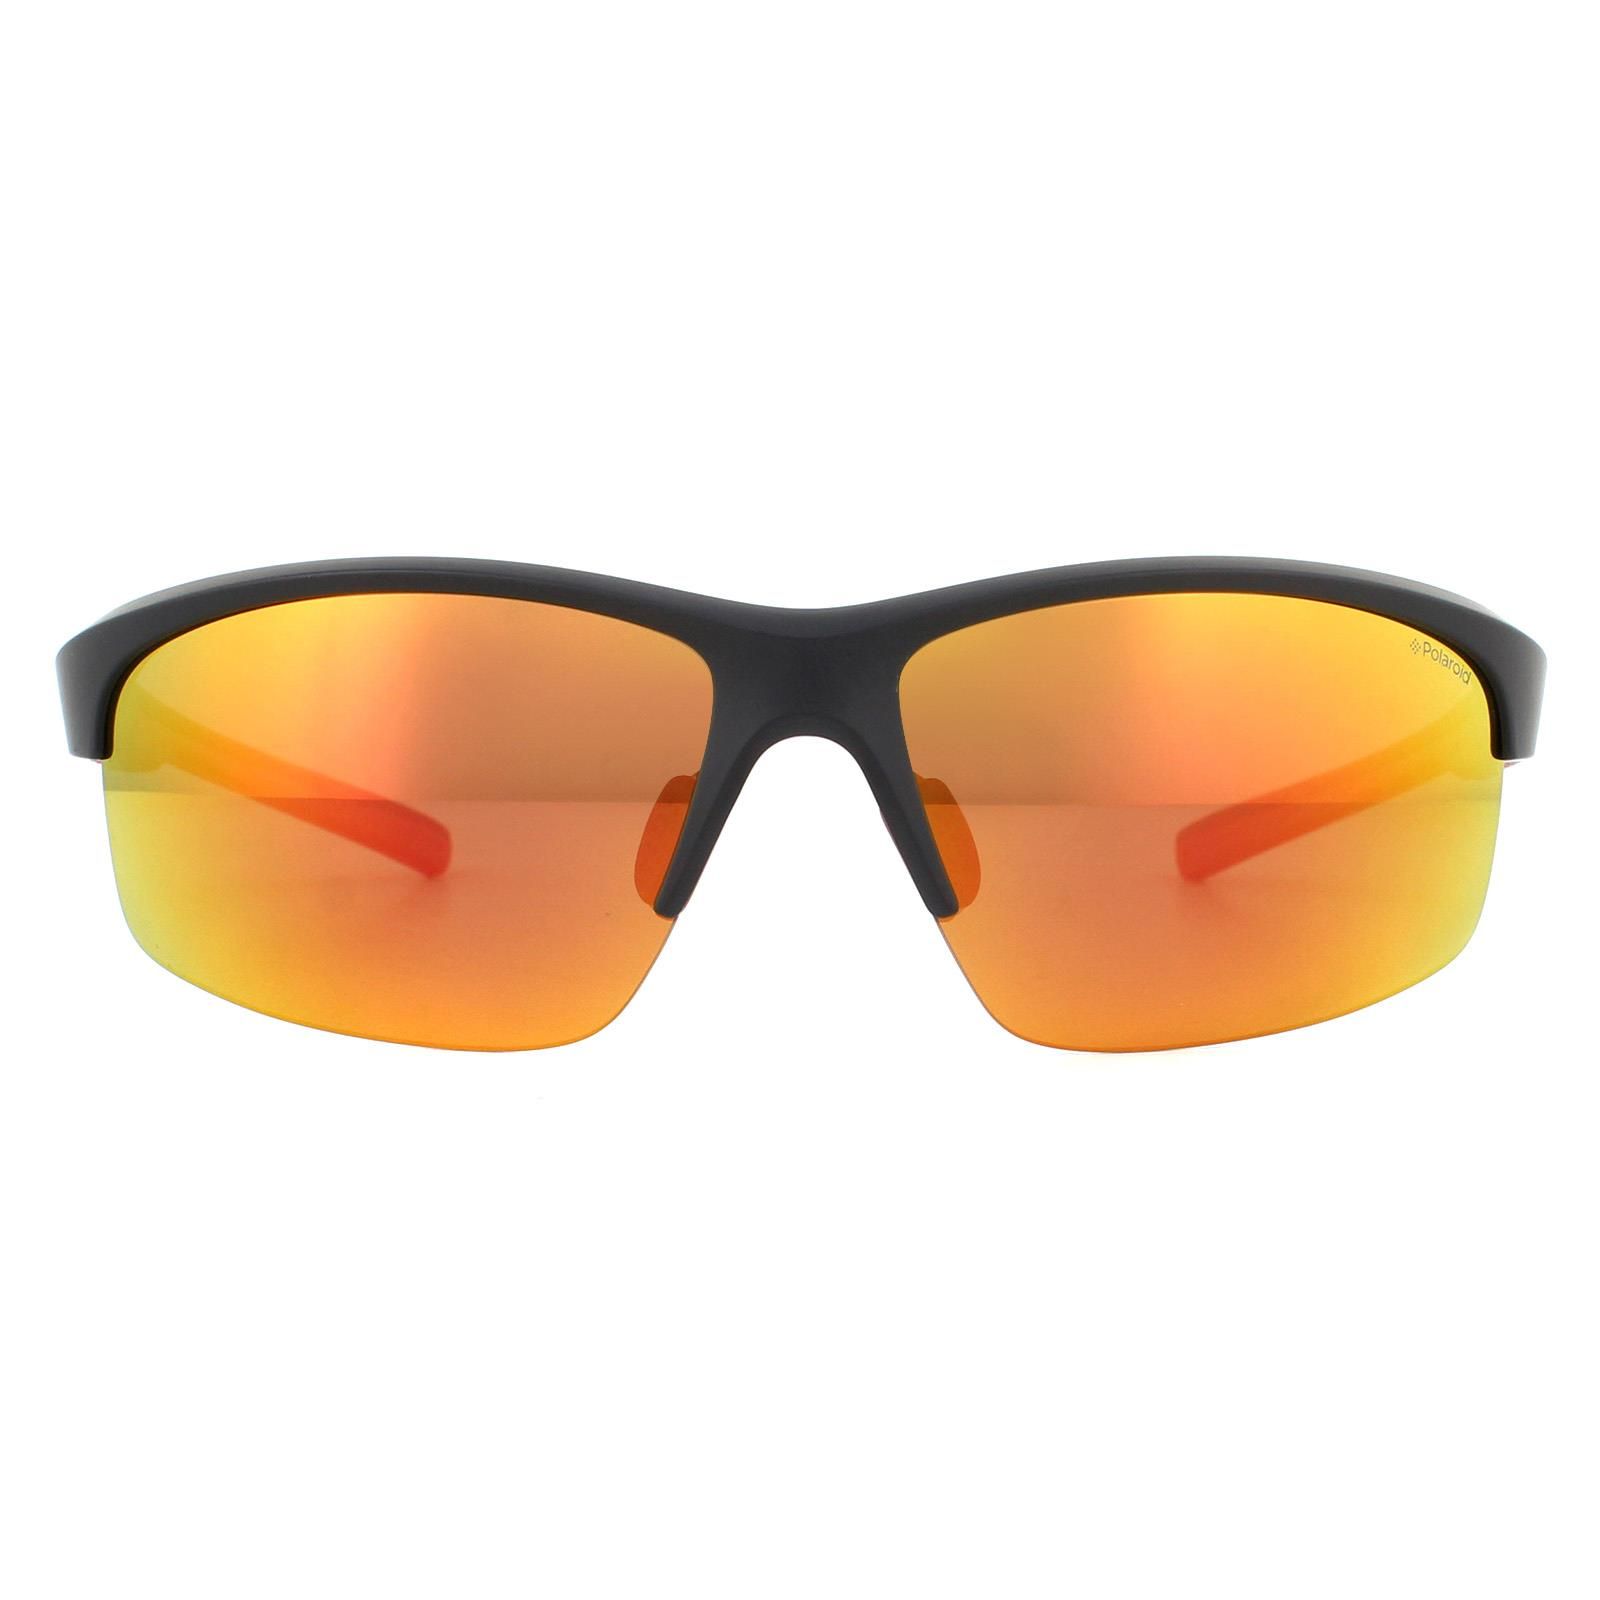 Polaroid Sport Sunglasses PLD 7018/N/S OIT OZ Black Red Red Mirror Polarized have a plastic frame in a semi rimless sport style and are designed for men. Polaroid's polarized lenses give superb glare protection for a fantastic price.